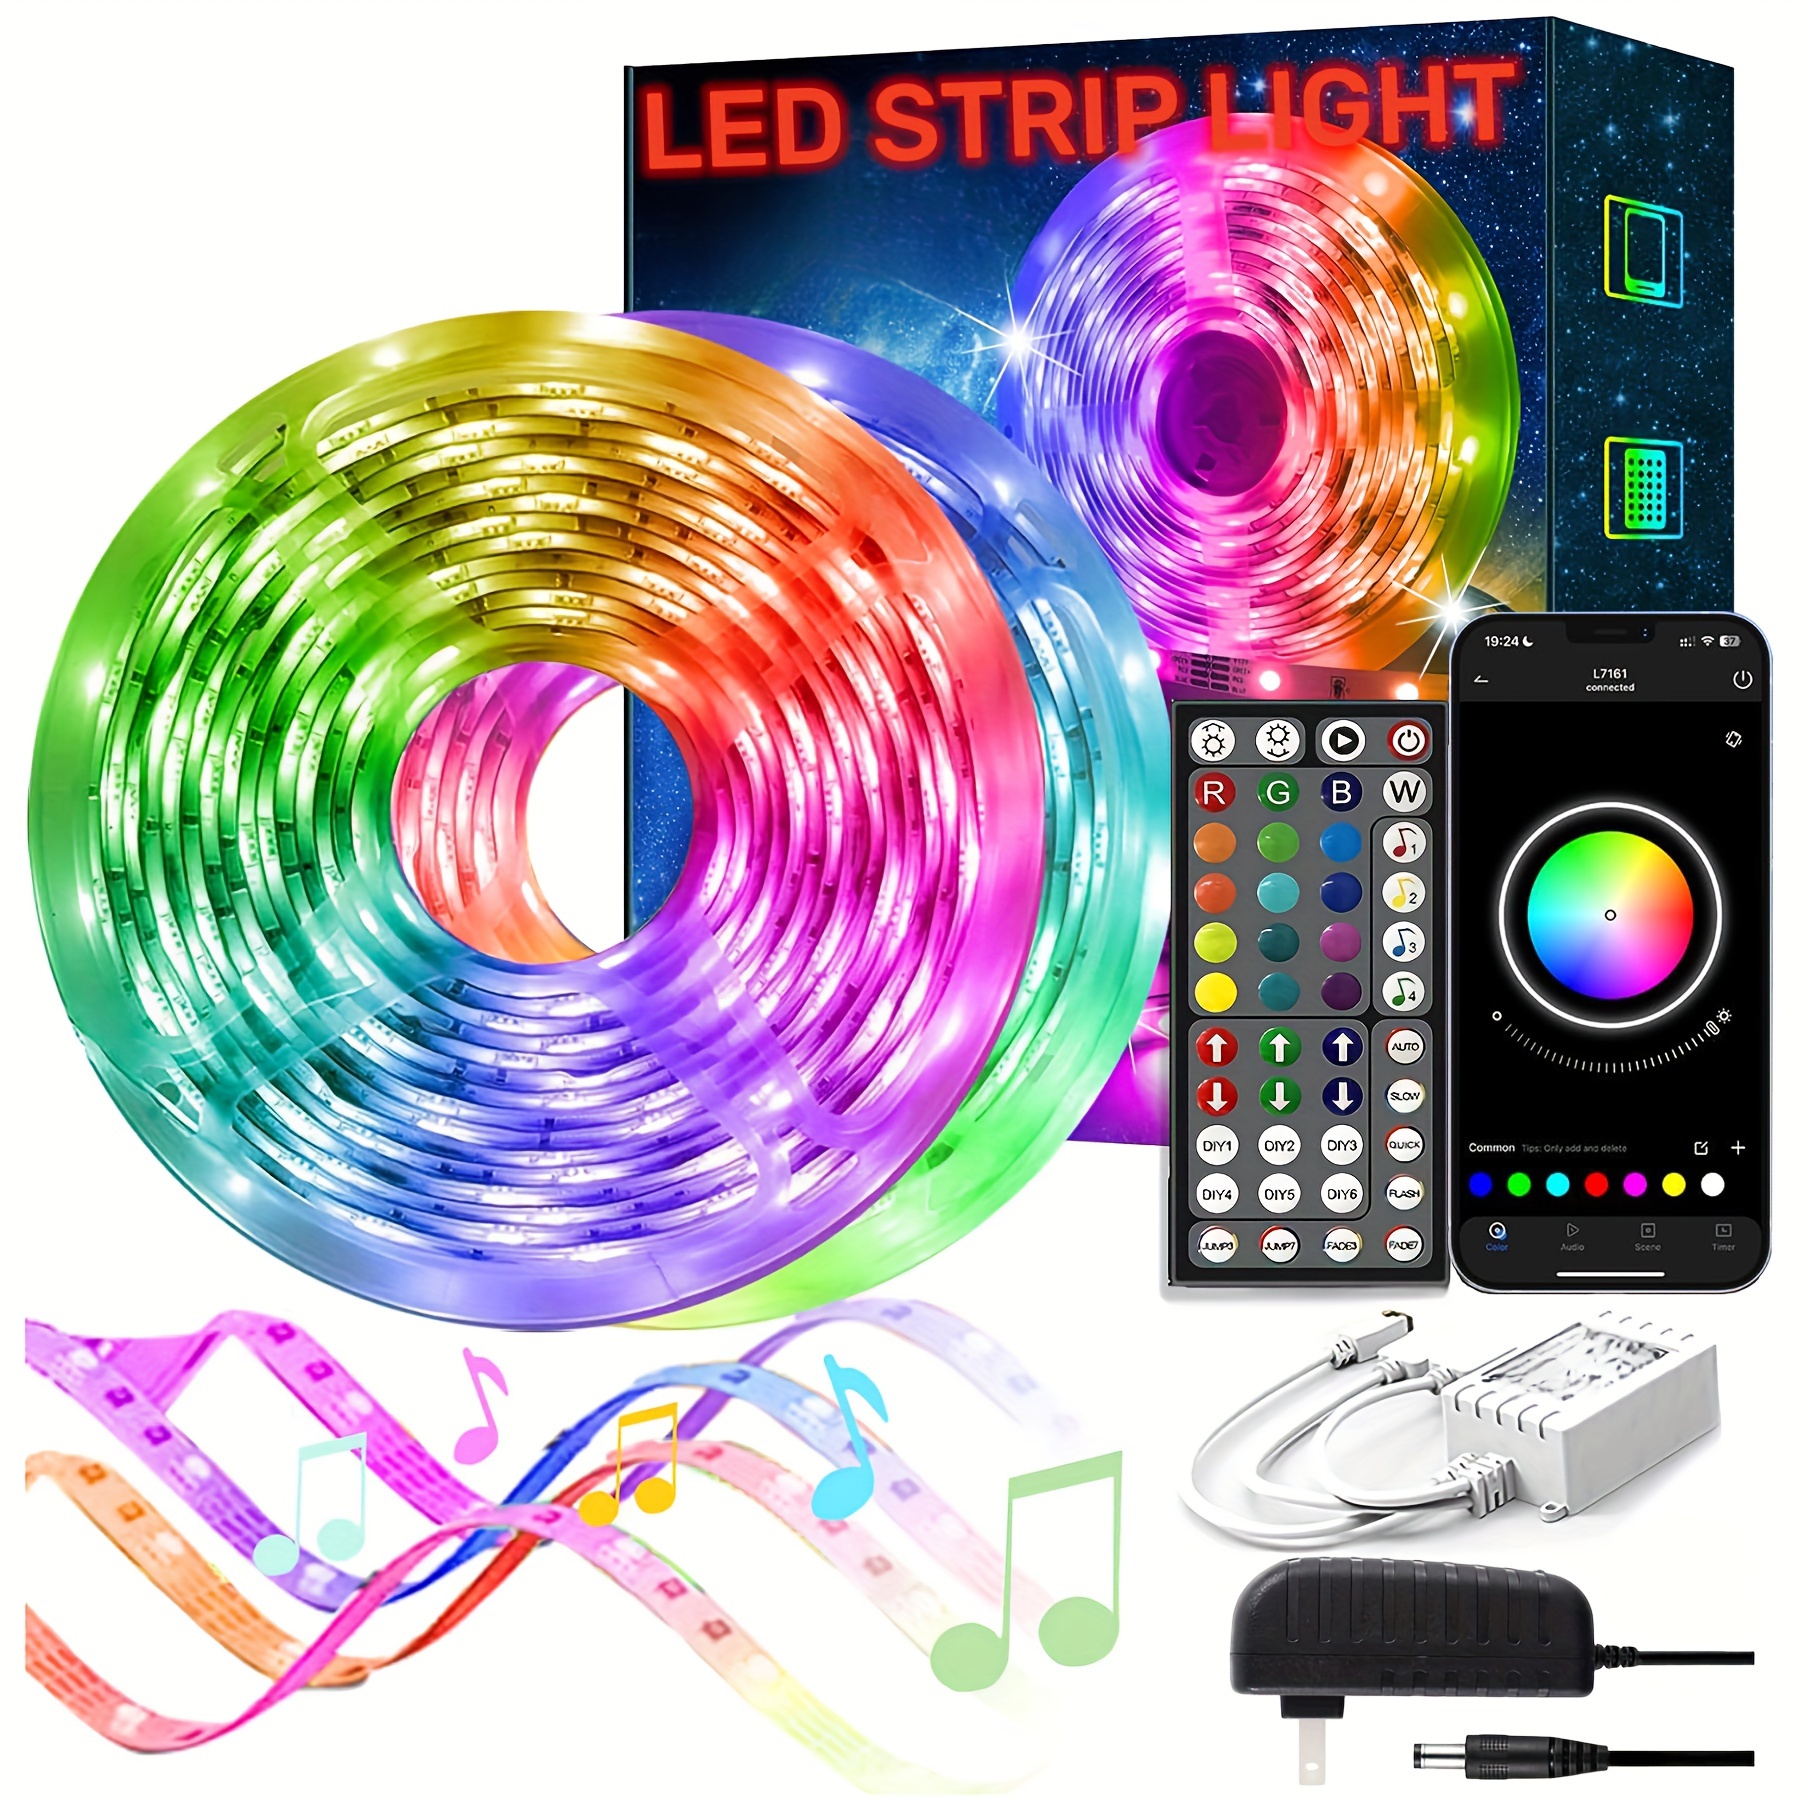 

Led Lights For Bedroom 130ft, Smart Led Strip Lights With App Control Remote Control, Rgb Led Light Strips, Music Sync Color Changing Room Decoration Party, Easter Decor(2 Rolls Of 65ft)